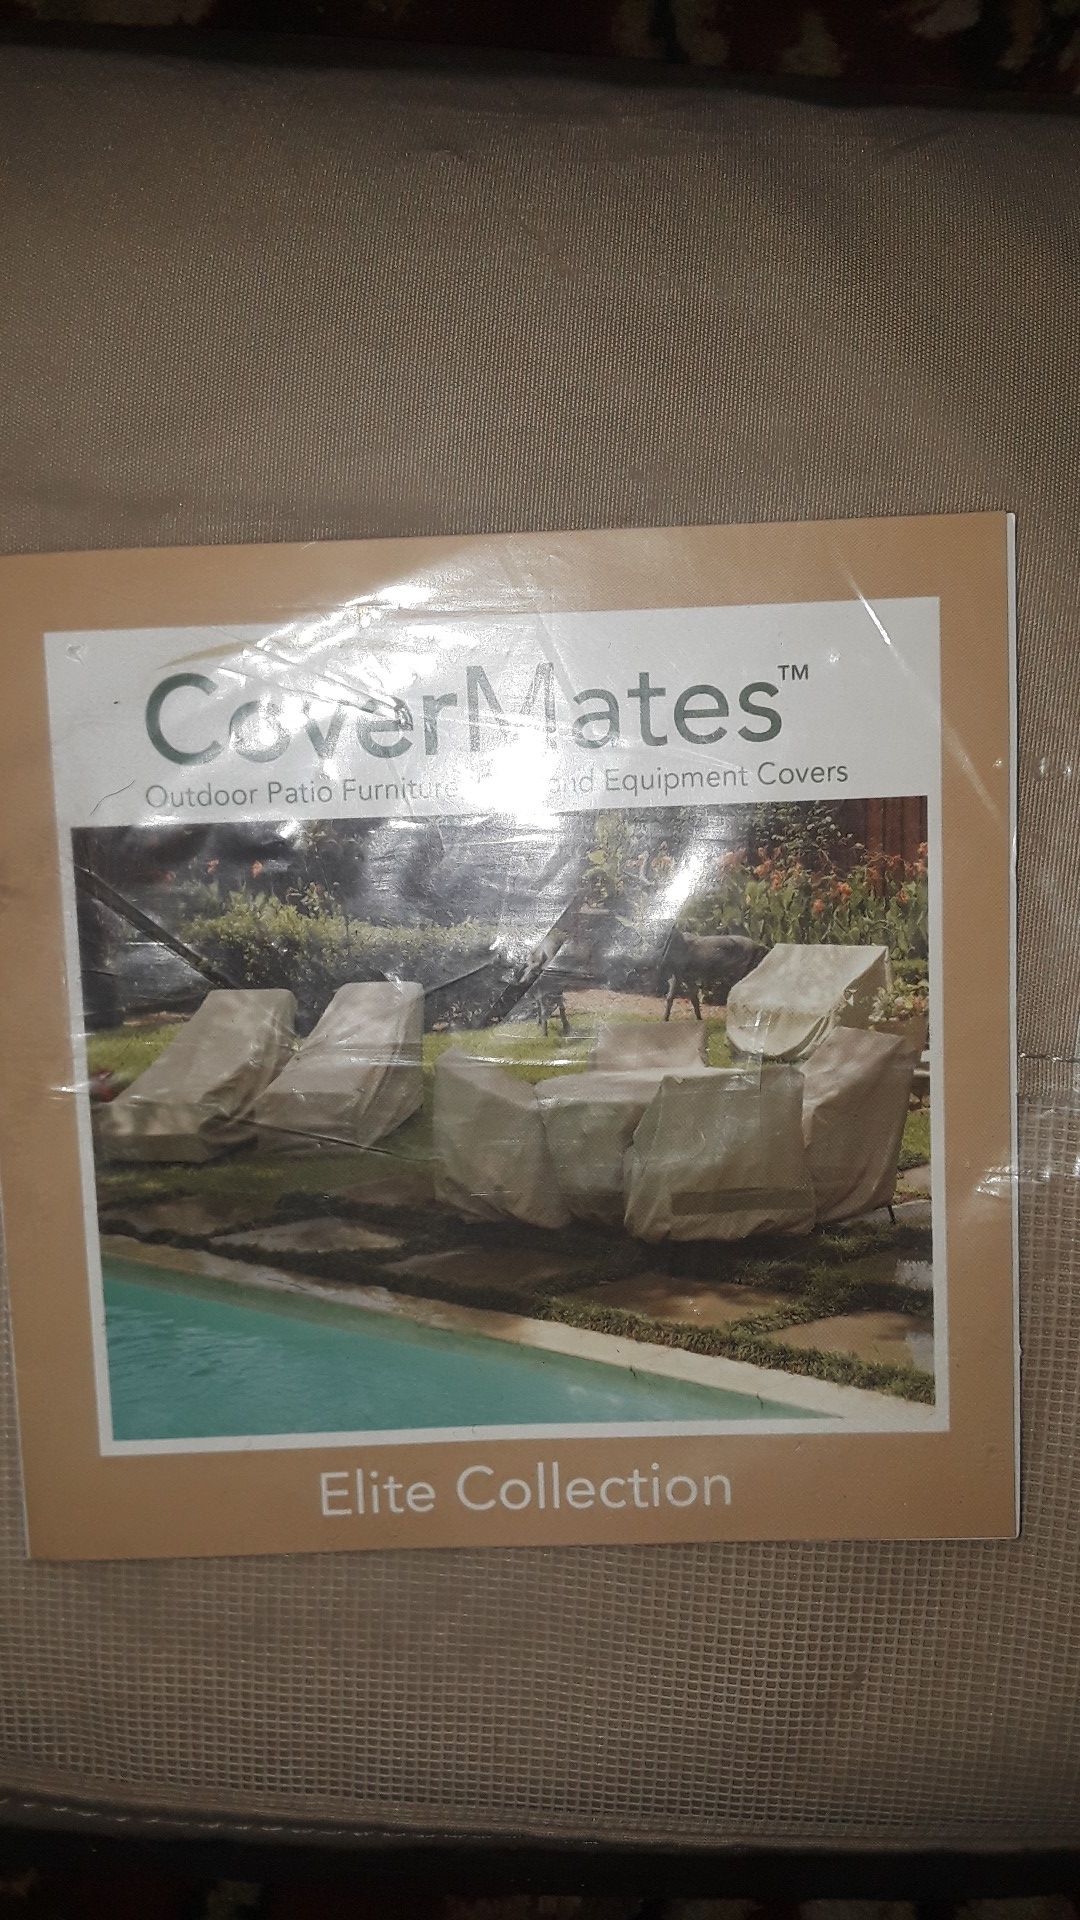 COVERMATES outdoor patio furniture Grill and Equipment covers Elite collection